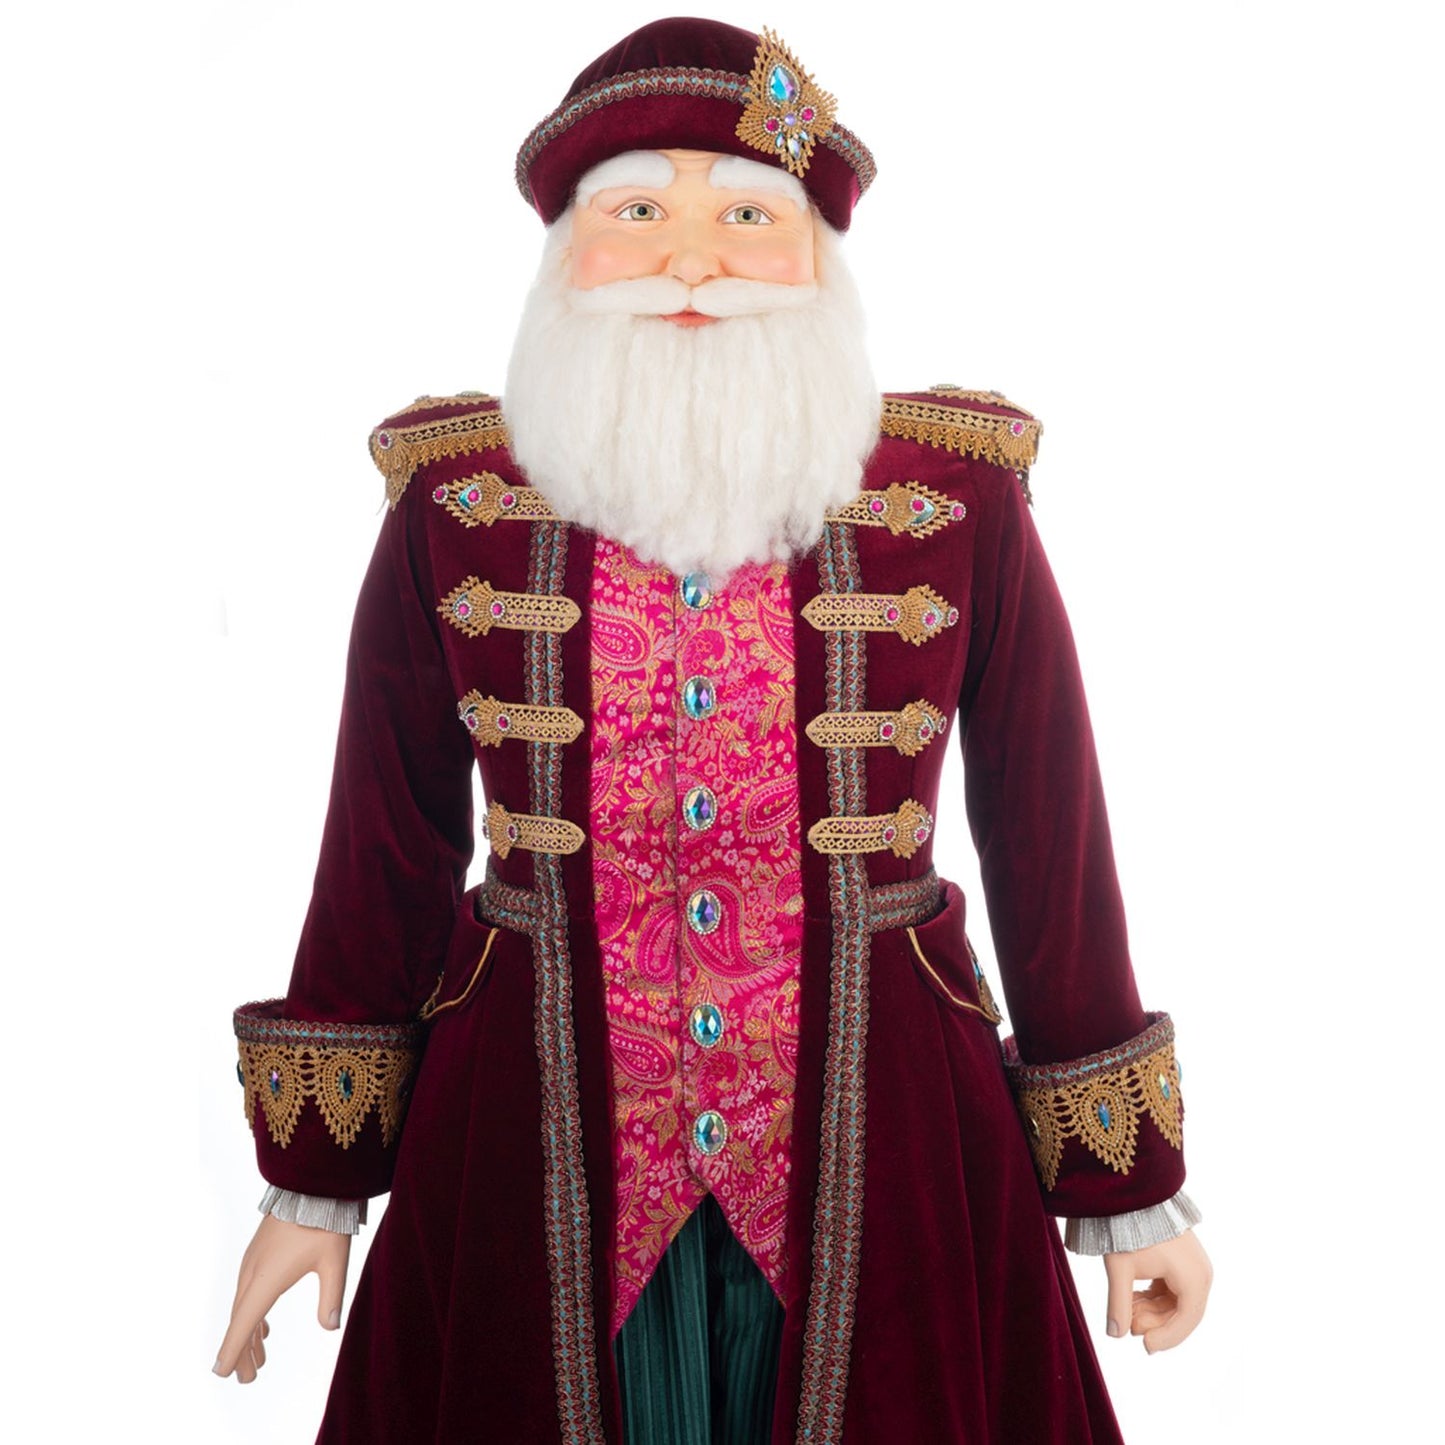 Katherine's Collection Sugar Plum Santa Life Size Doll, 29x20x64 Inches, Red Resin